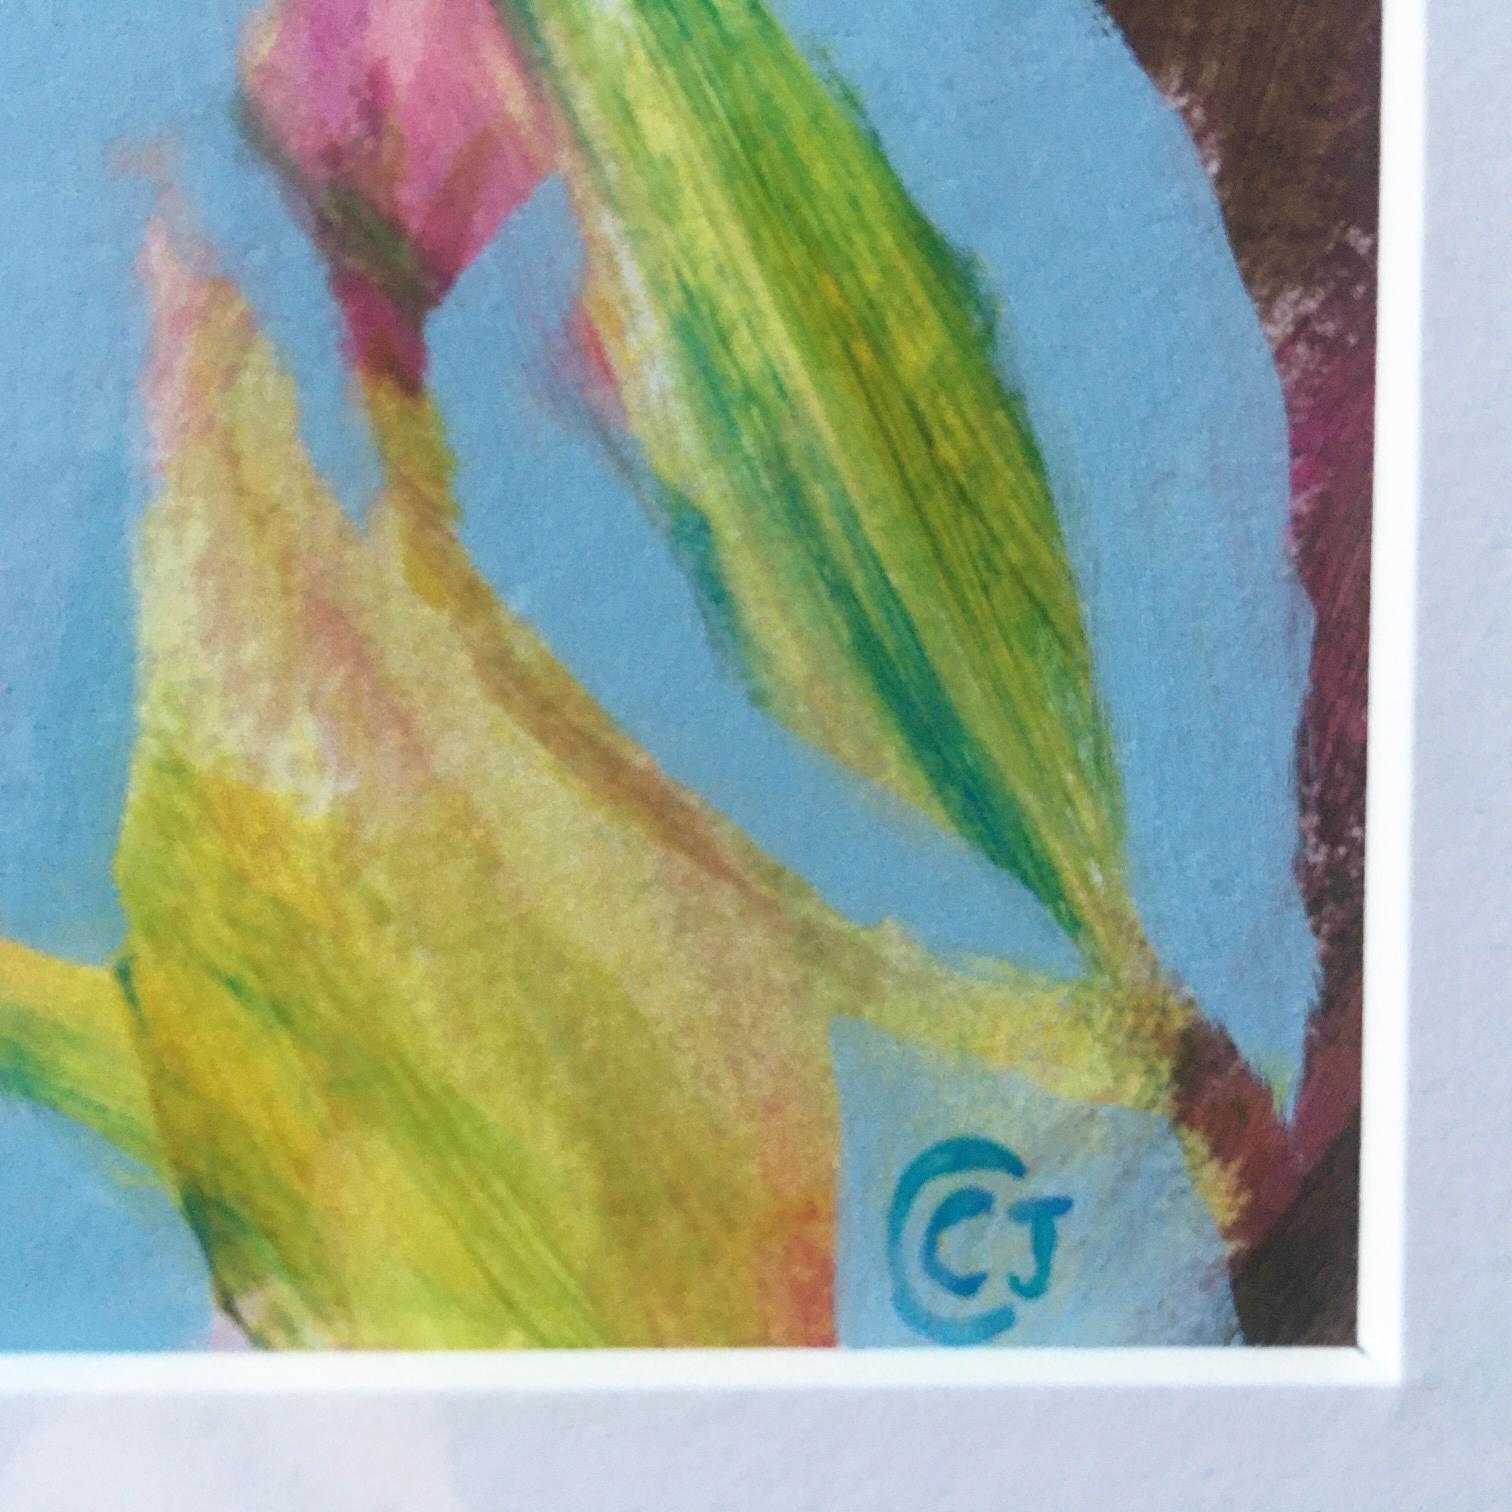 Warbler By Carolyn Carter [2020]
Handsigned by the artist
Acrylic on Board
Image size: H:30 cm x W:25 cm
Frame Size: H:44 cm x W:38 cm x D:3cm
Please note that insitu images are purely an indication of how a piece may look
This original painting is